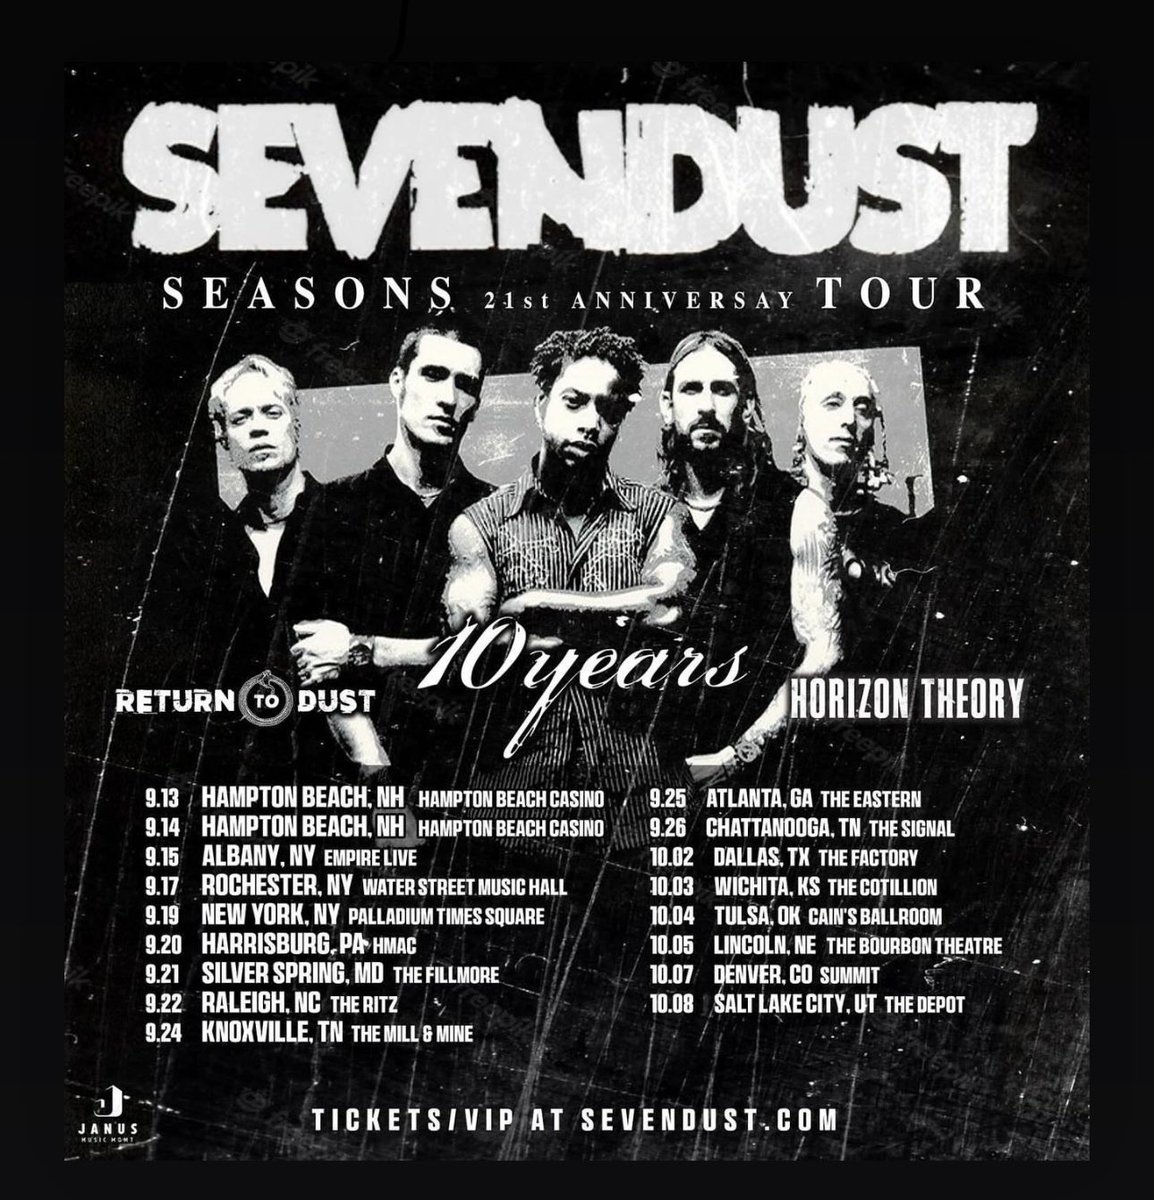 Sevendust and Nothing More announce new tours